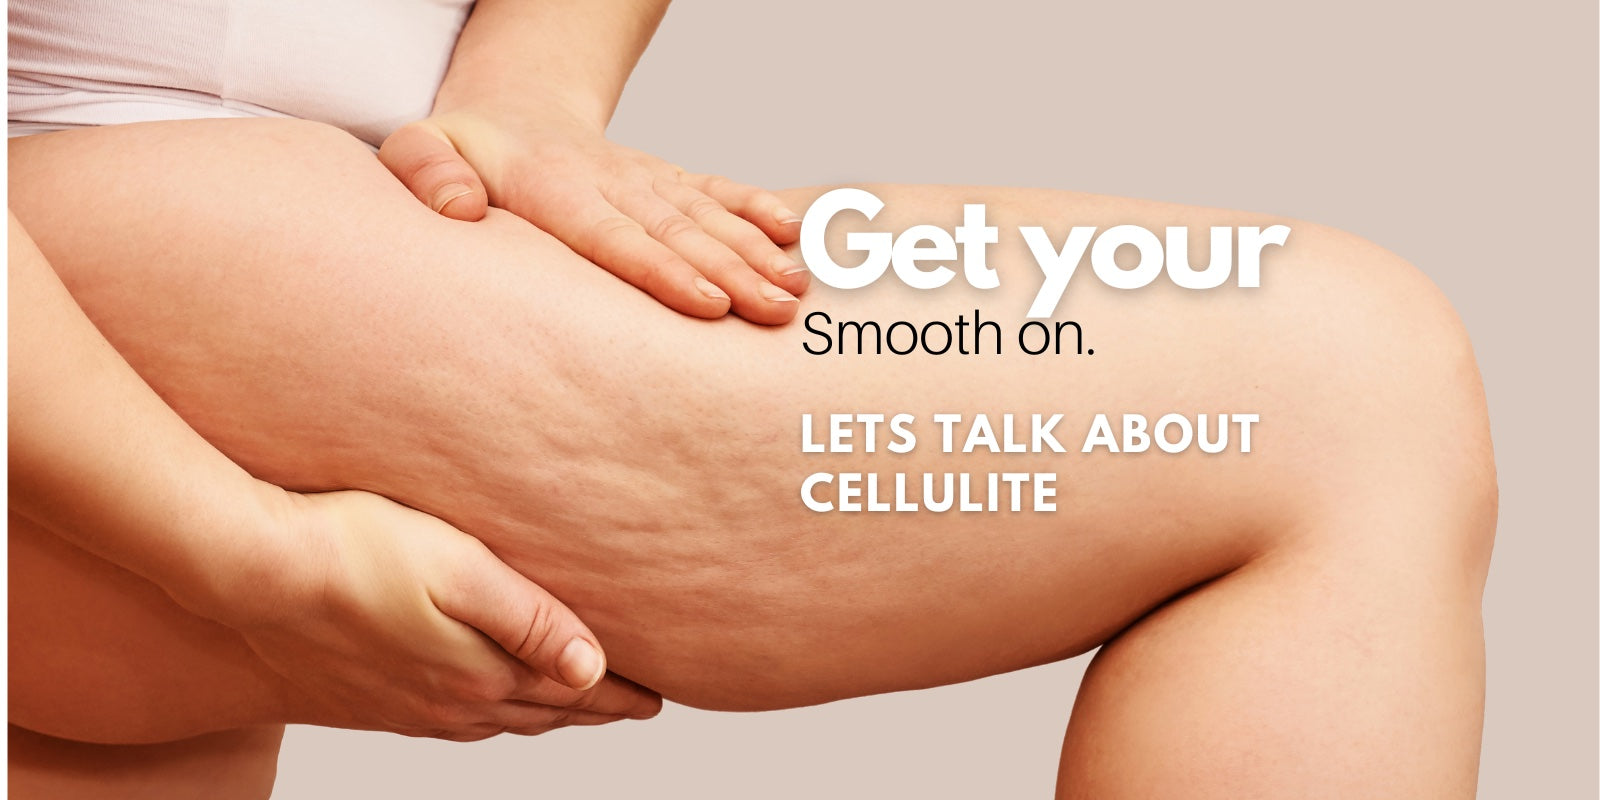 Cellulite treatments Victoria BC. Body smoothing, body contouring.